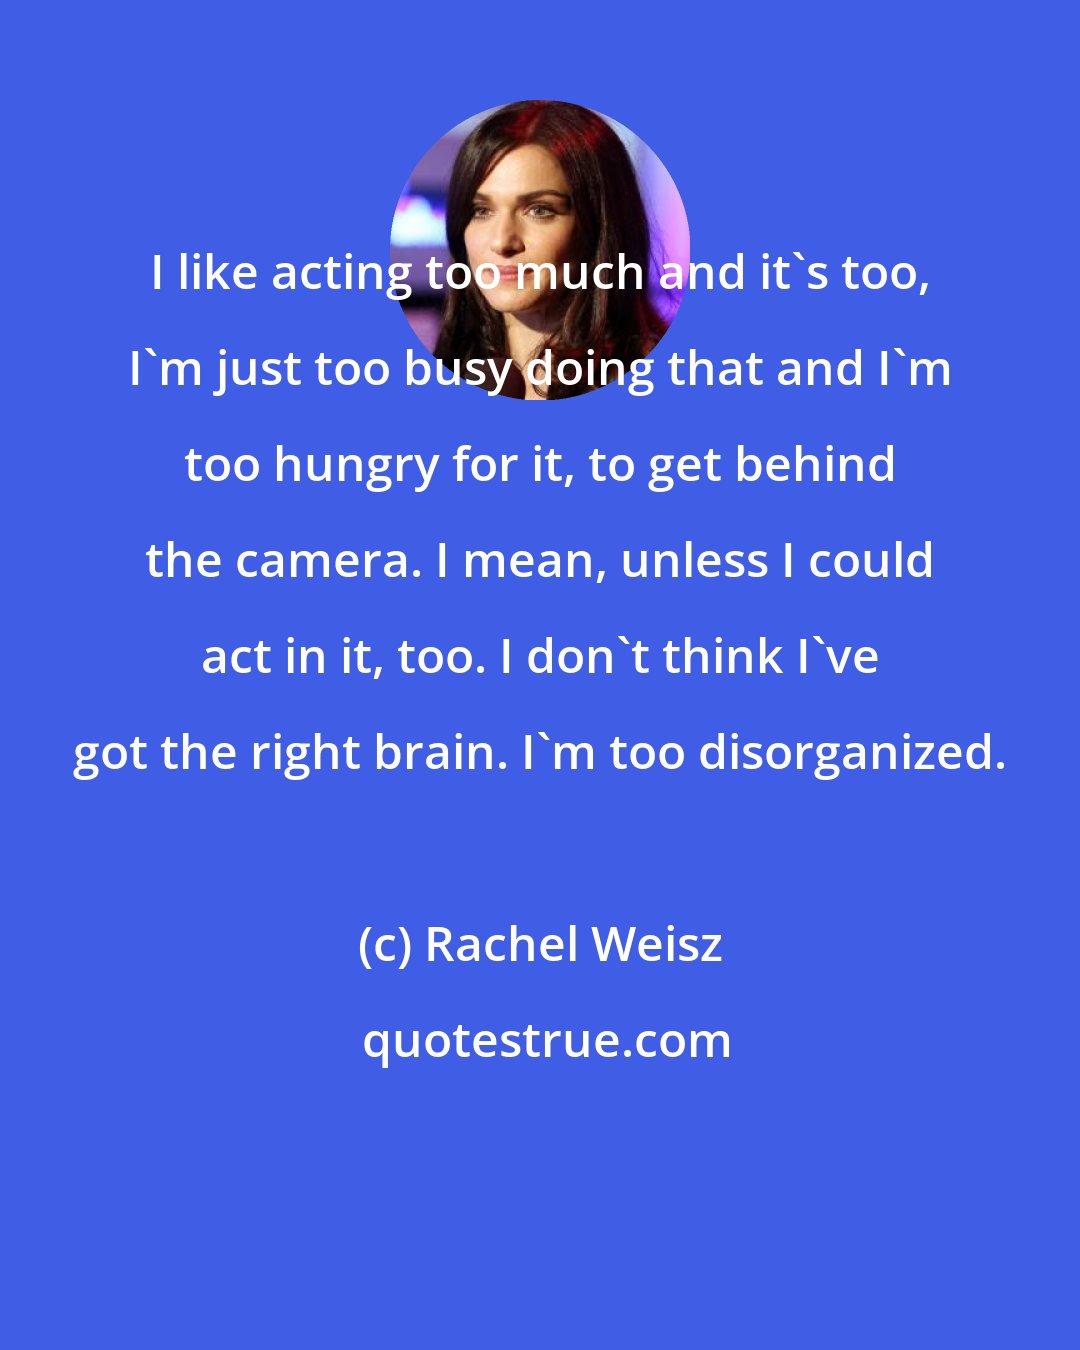 Rachel Weisz: I like acting too much and it's too, I'm just too busy doing that and I'm too hungry for it, to get behind the camera. I mean, unless I could act in it, too. I don't think I've got the right brain. I'm too disorganized.